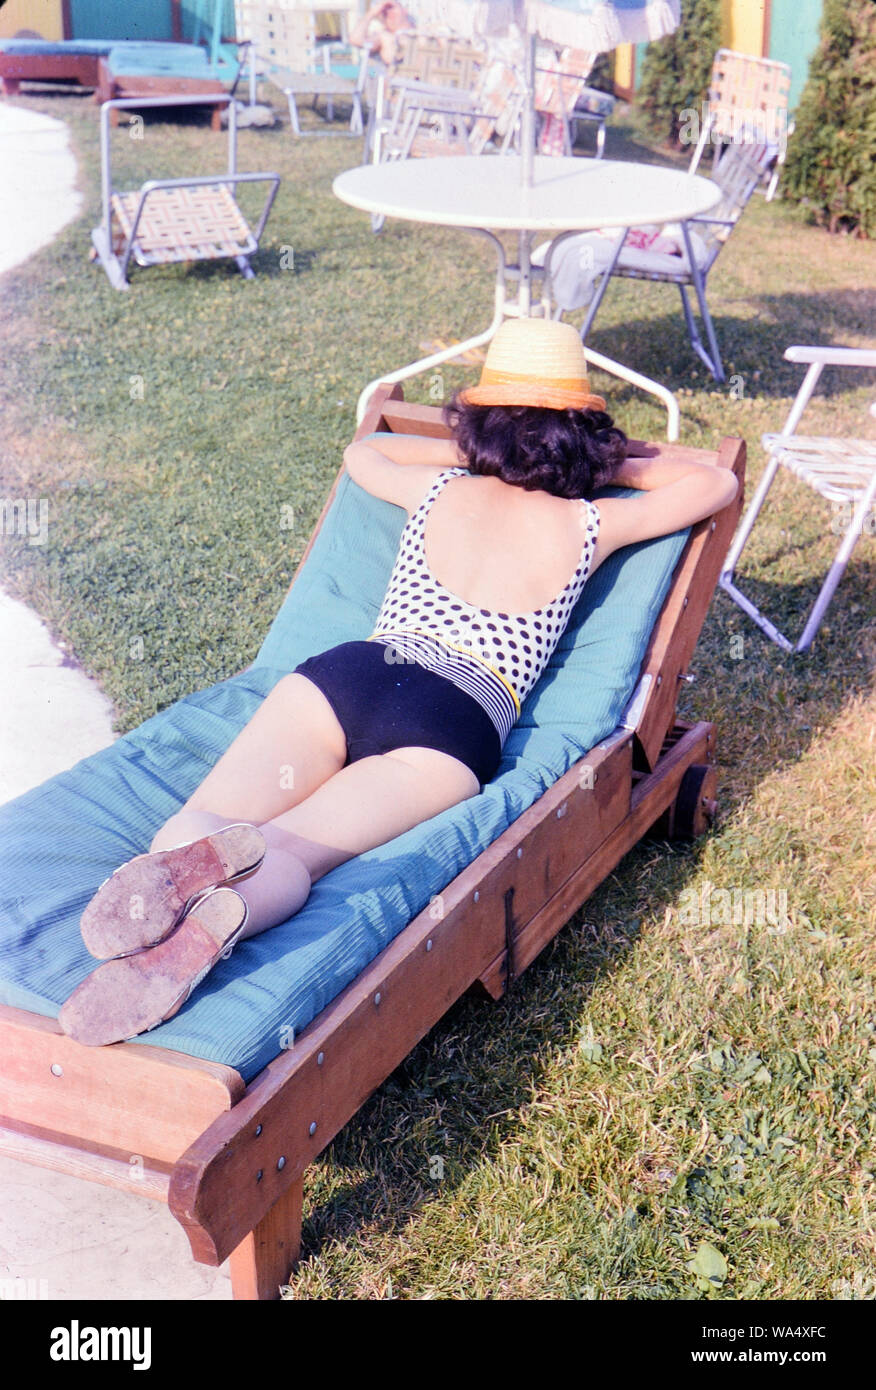 Woman sunbathing outdoors, lying on her stomach, wearing a hat 1966 Stock Photo